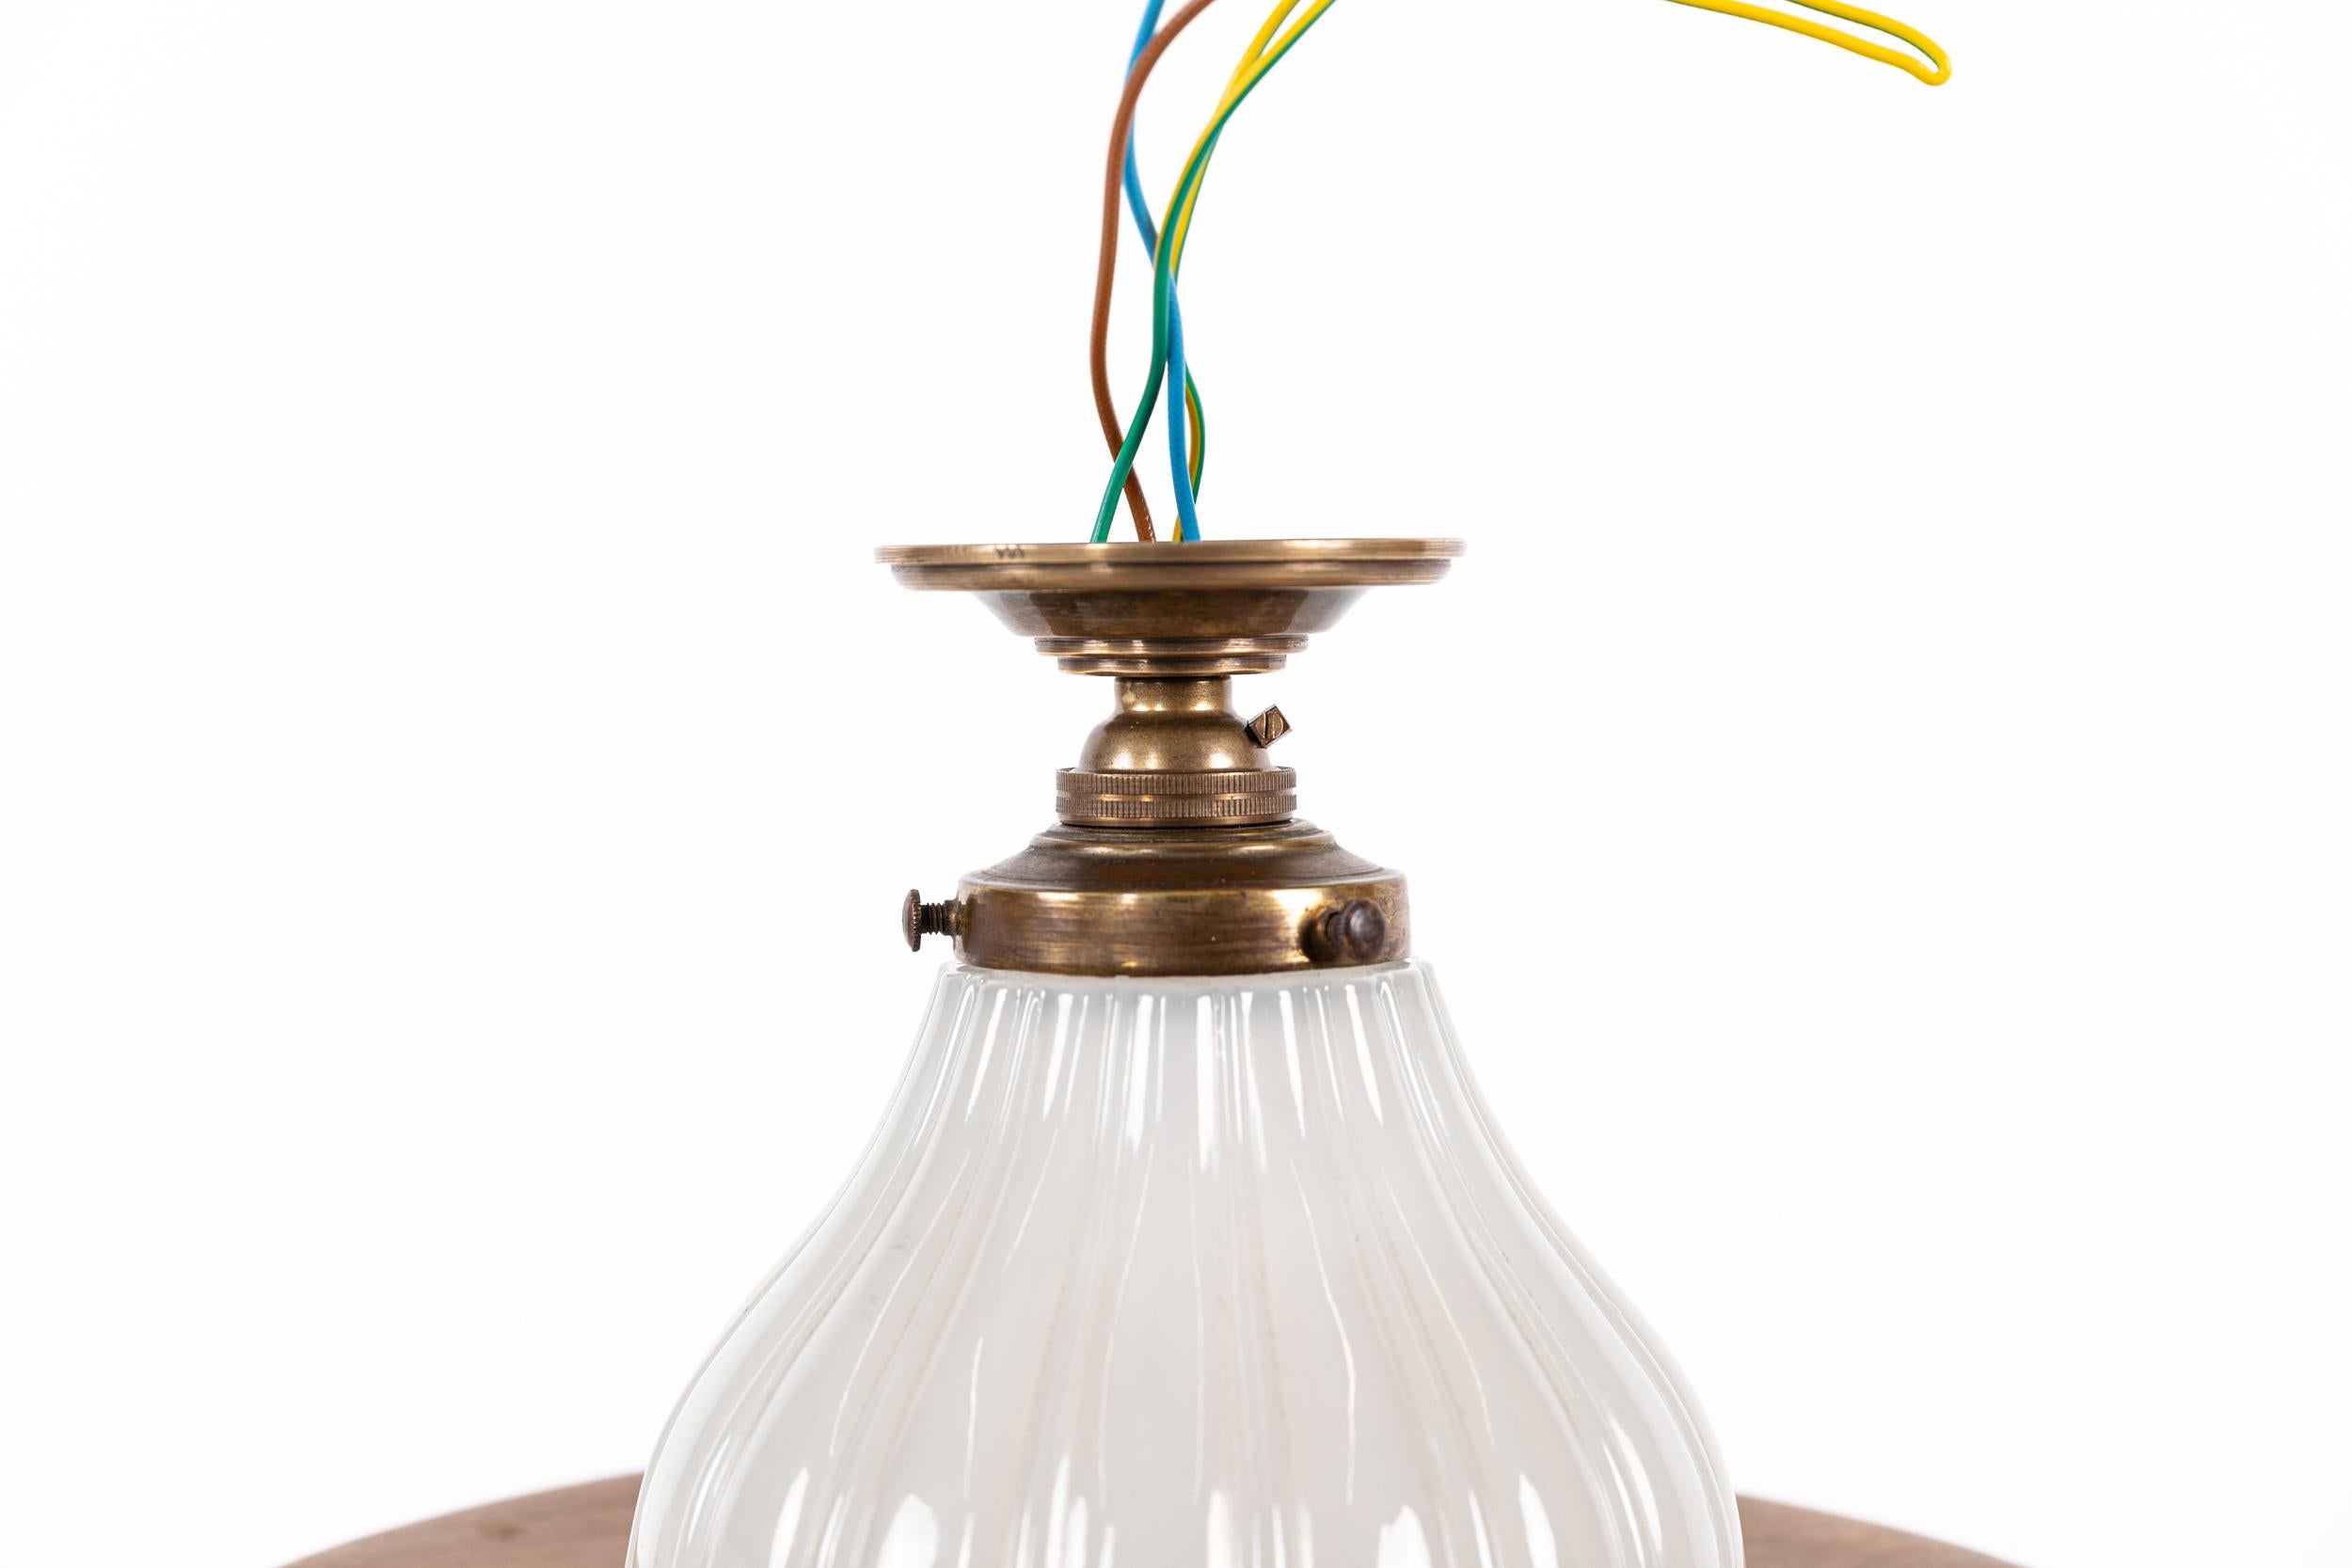 An elegantly formed ceiling lamp with heavy duty Jefferson Moonstone glass shade. c.1920

Excellent quality with thick pressed opaque fluted glass shades and heavy duty brass gallery and ceiling mount.